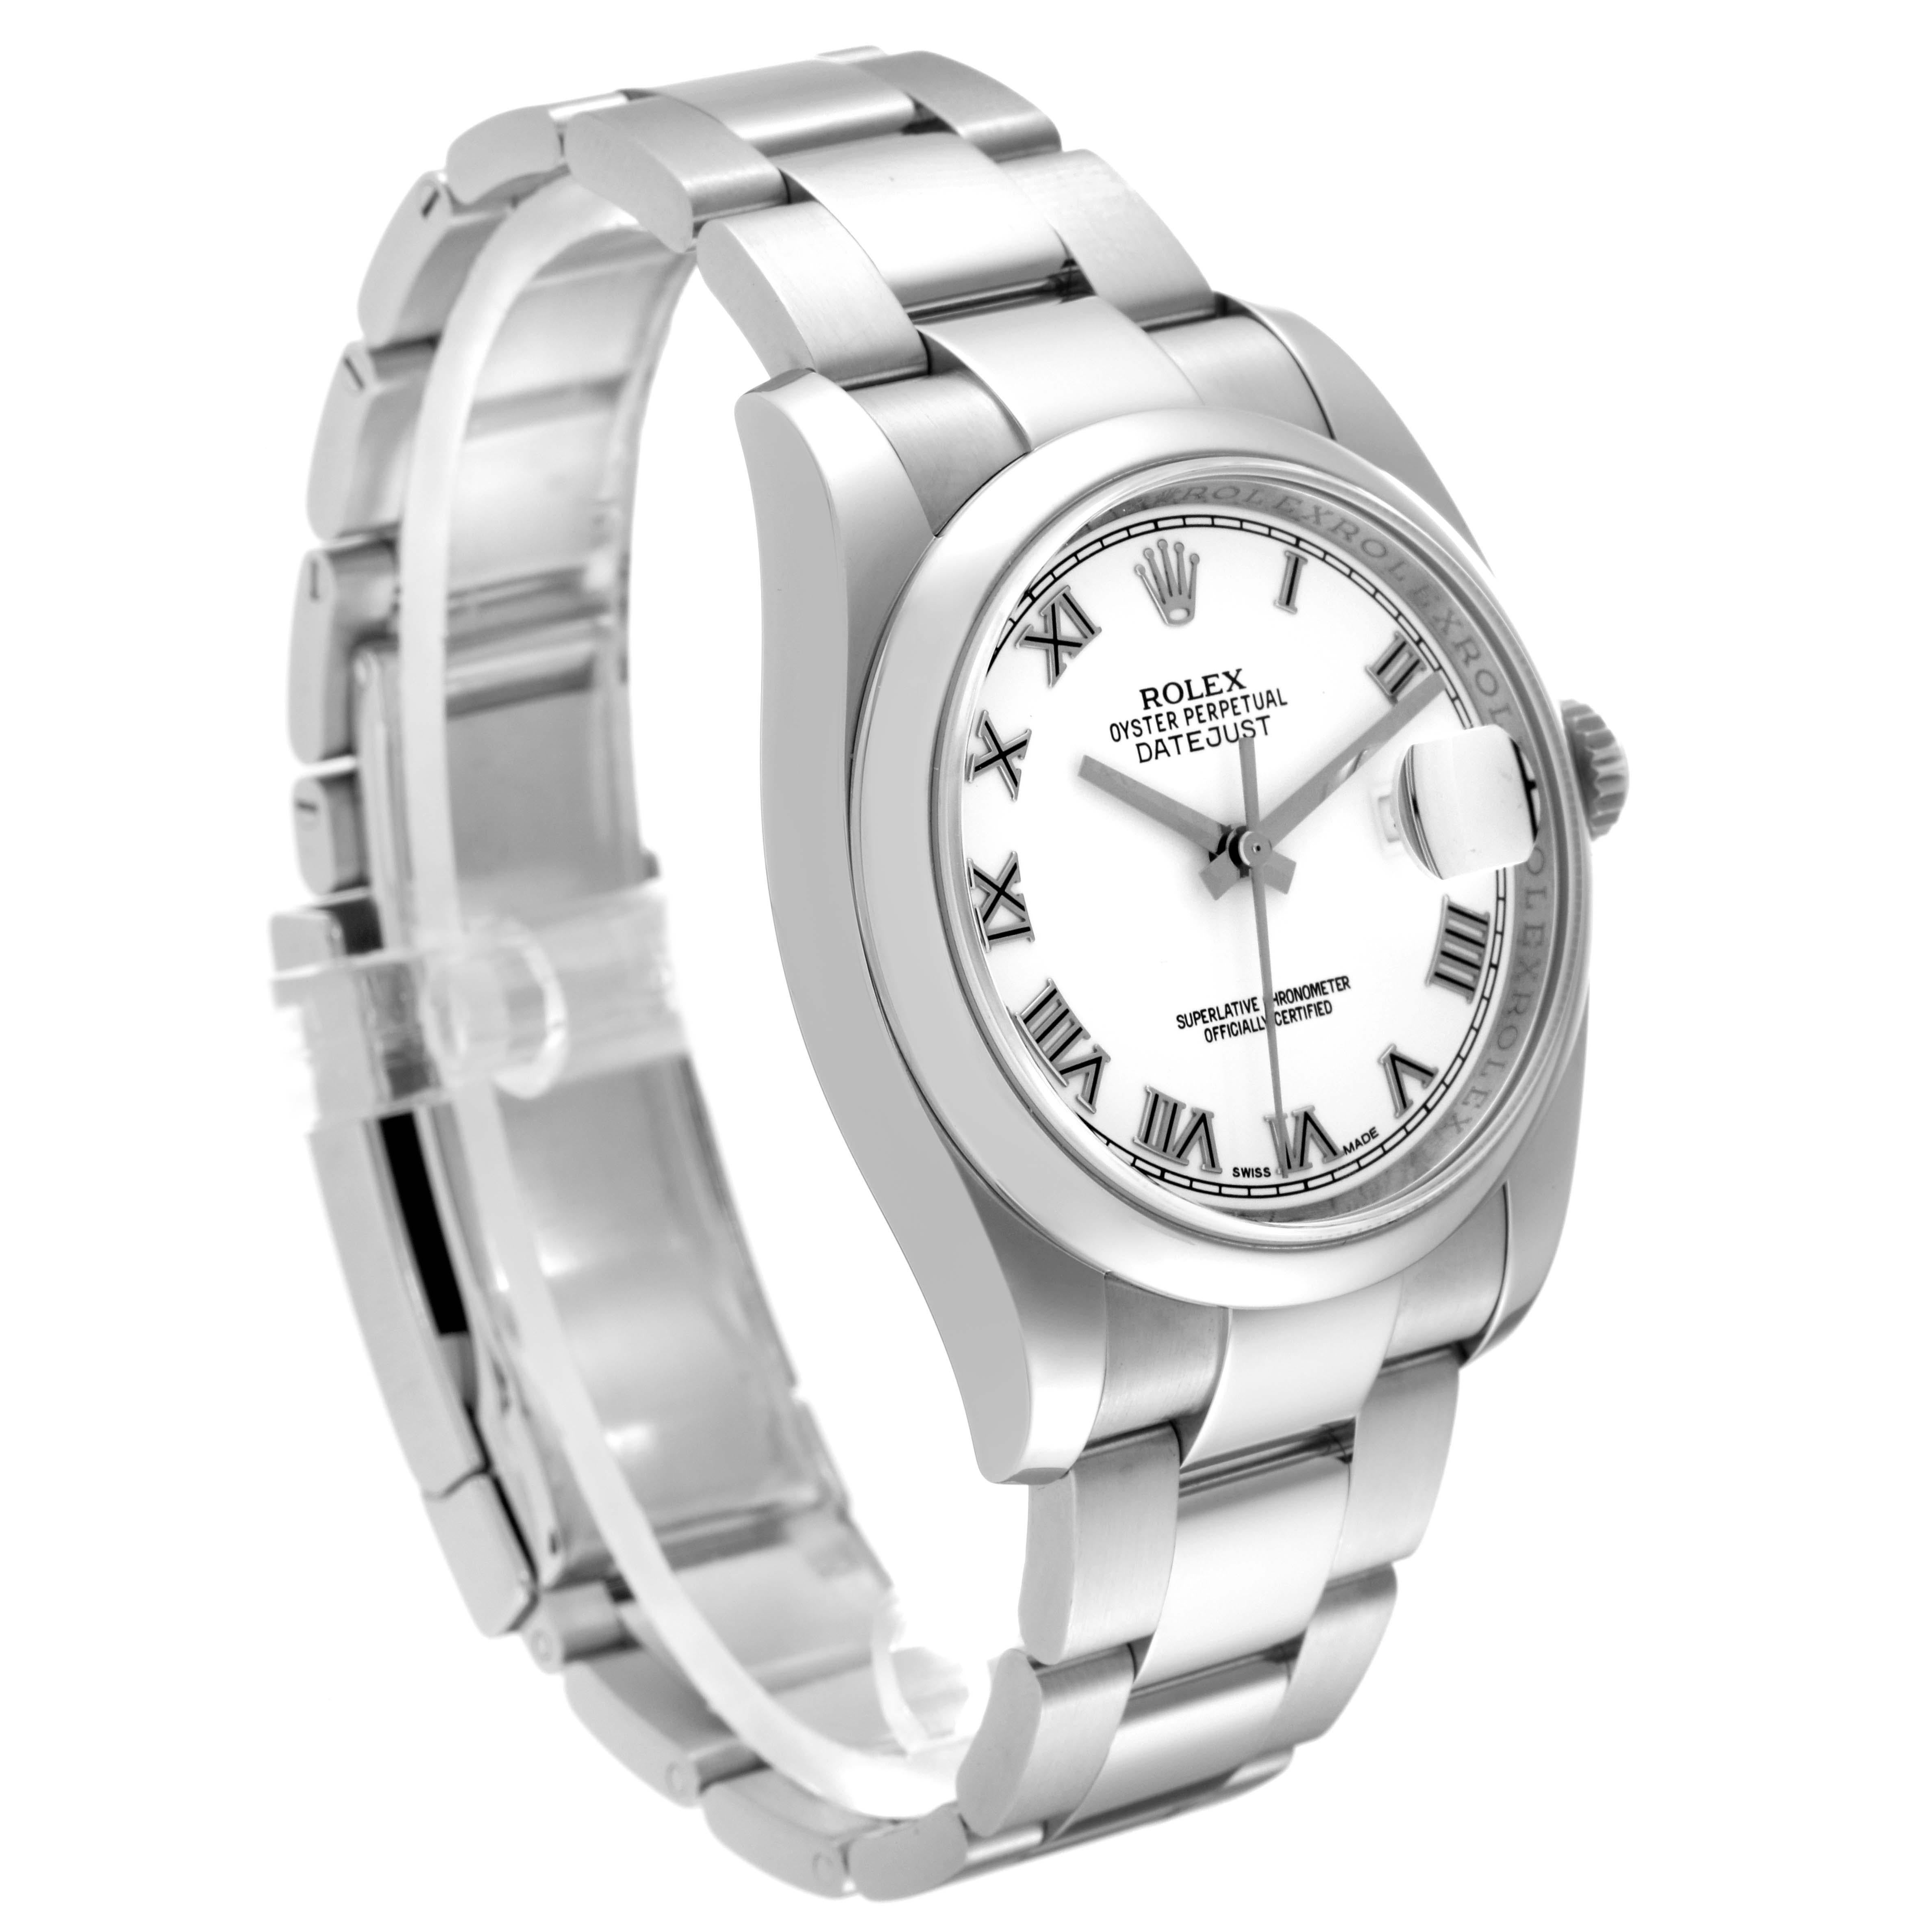 Rolex Datejust White Roman Dial Steel Mens Watch 116200 Box Card For Sale 1